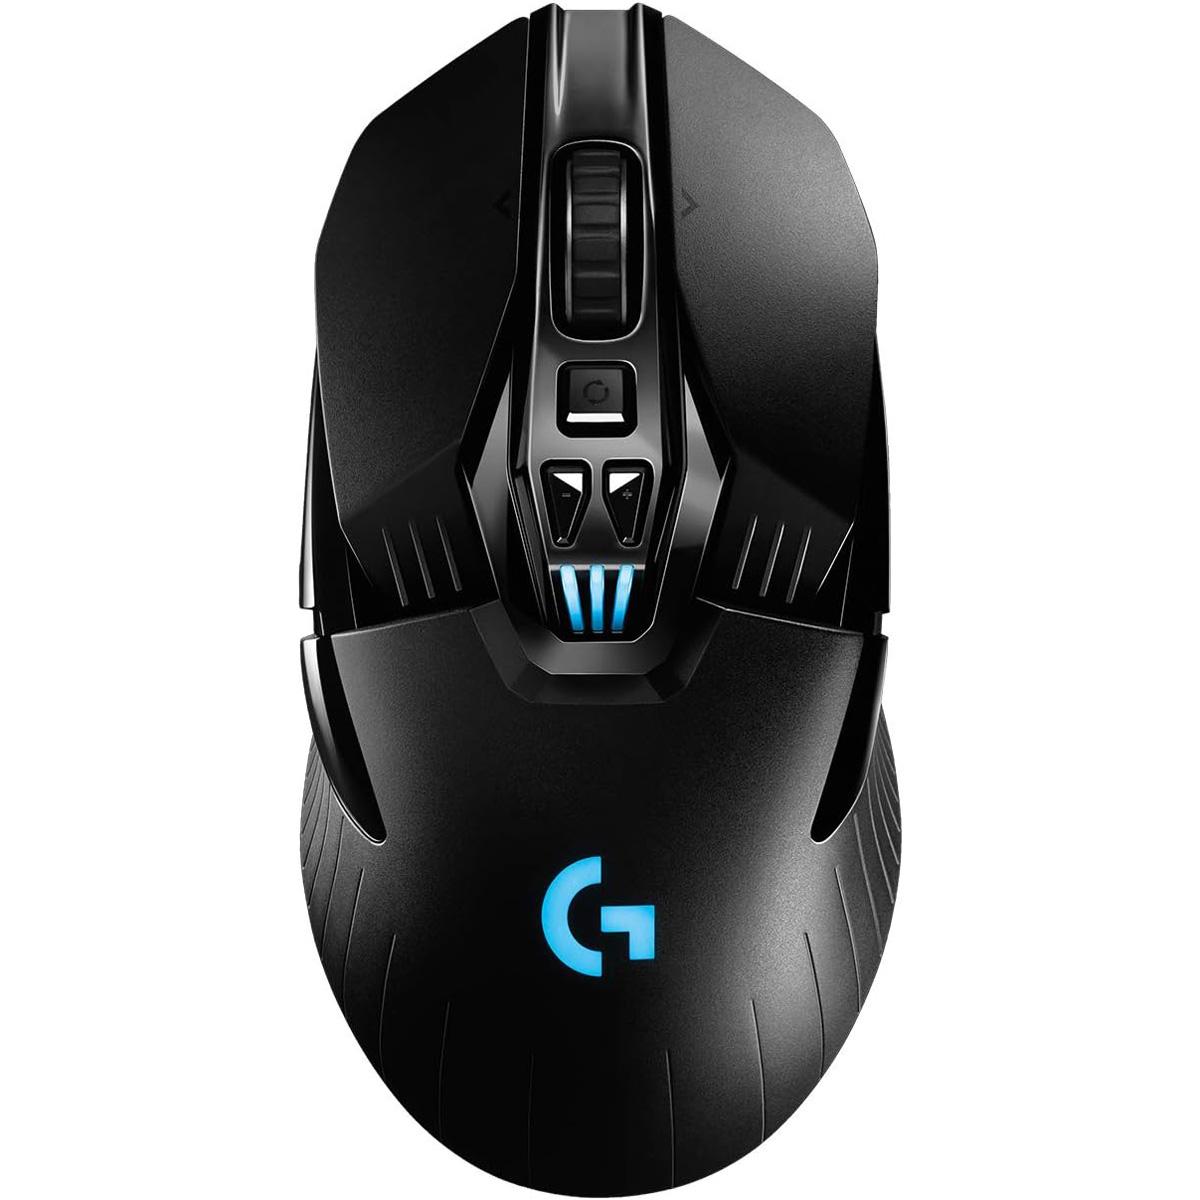 Logitech G903 Lightspeed Wireless Gaming Mouse for $74.99 Shipped